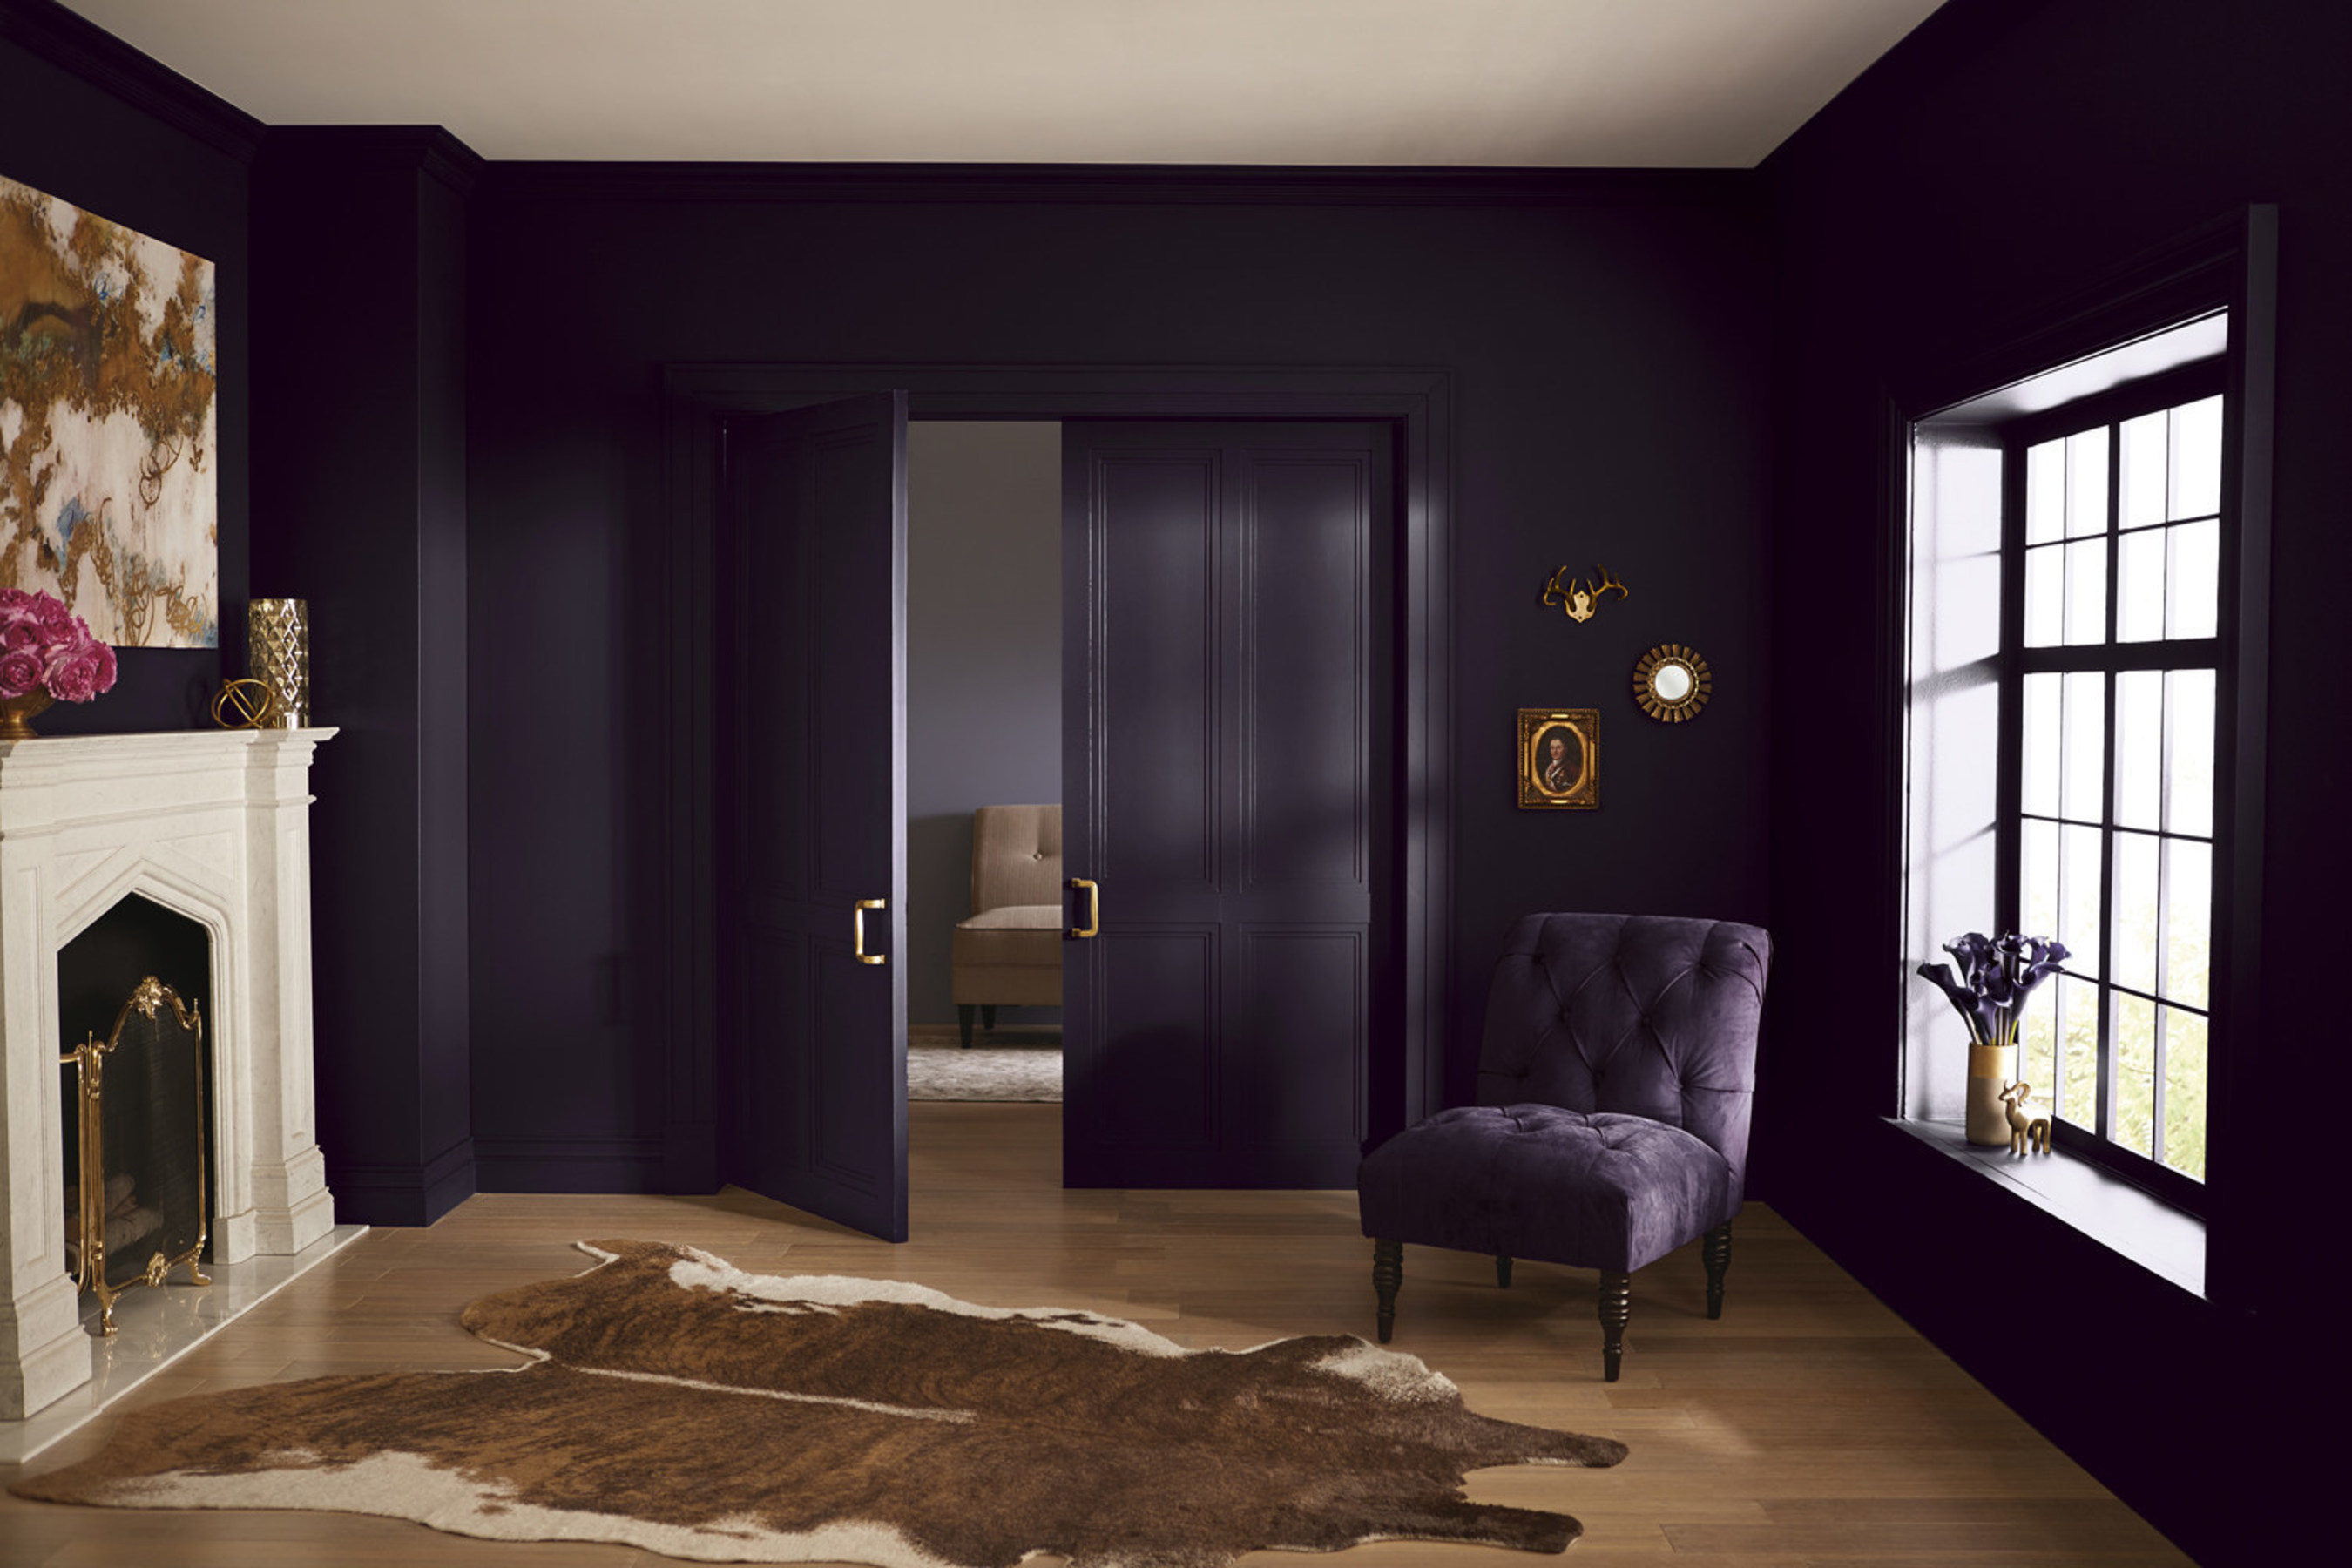 Lowe's: 4010-2 Twilight Purple/ Ace: VR089A Black Currant/ Independent Retailers: V125-6 Black Currant/ This deep violet black has a powerful influence, symbolizing the mainstreaming of meditation and mindfulness as a way to get in touch with our inner senses. "The violet undertone in this midnight black gives it a distinct personality - dark, decorative and a bit moody," said Kim.